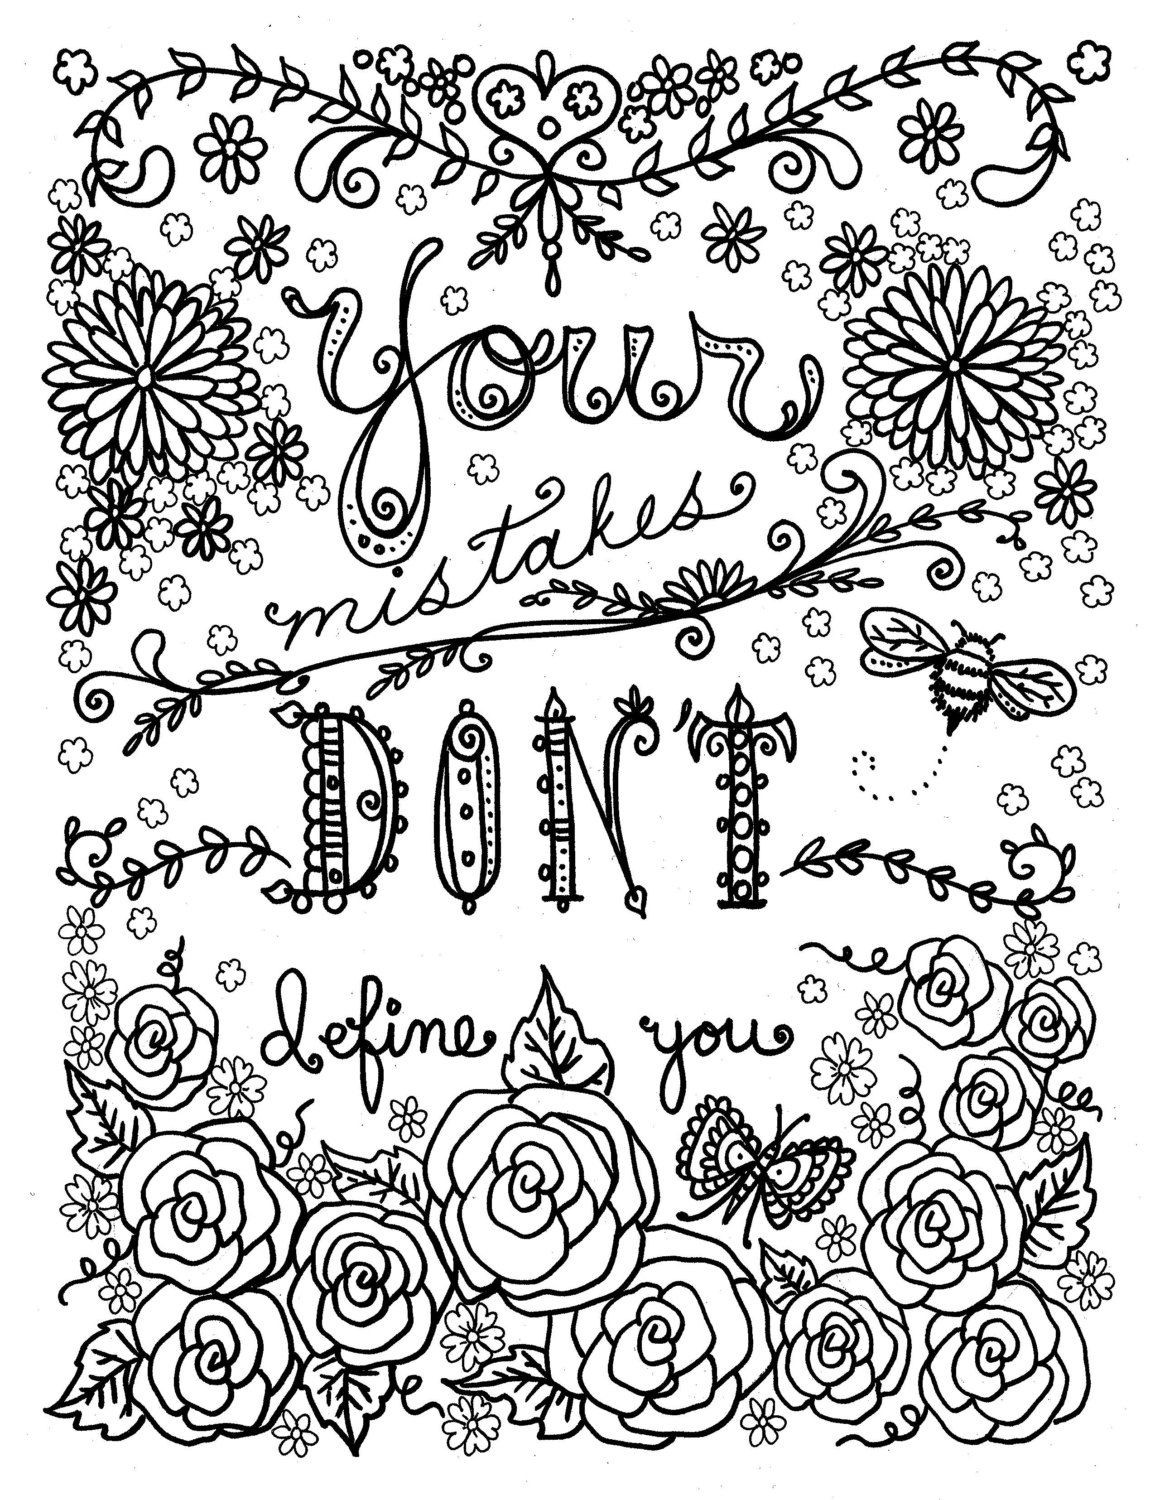 Quote Coloring Pages For Adults
 Pin by iDMe on Embroidery